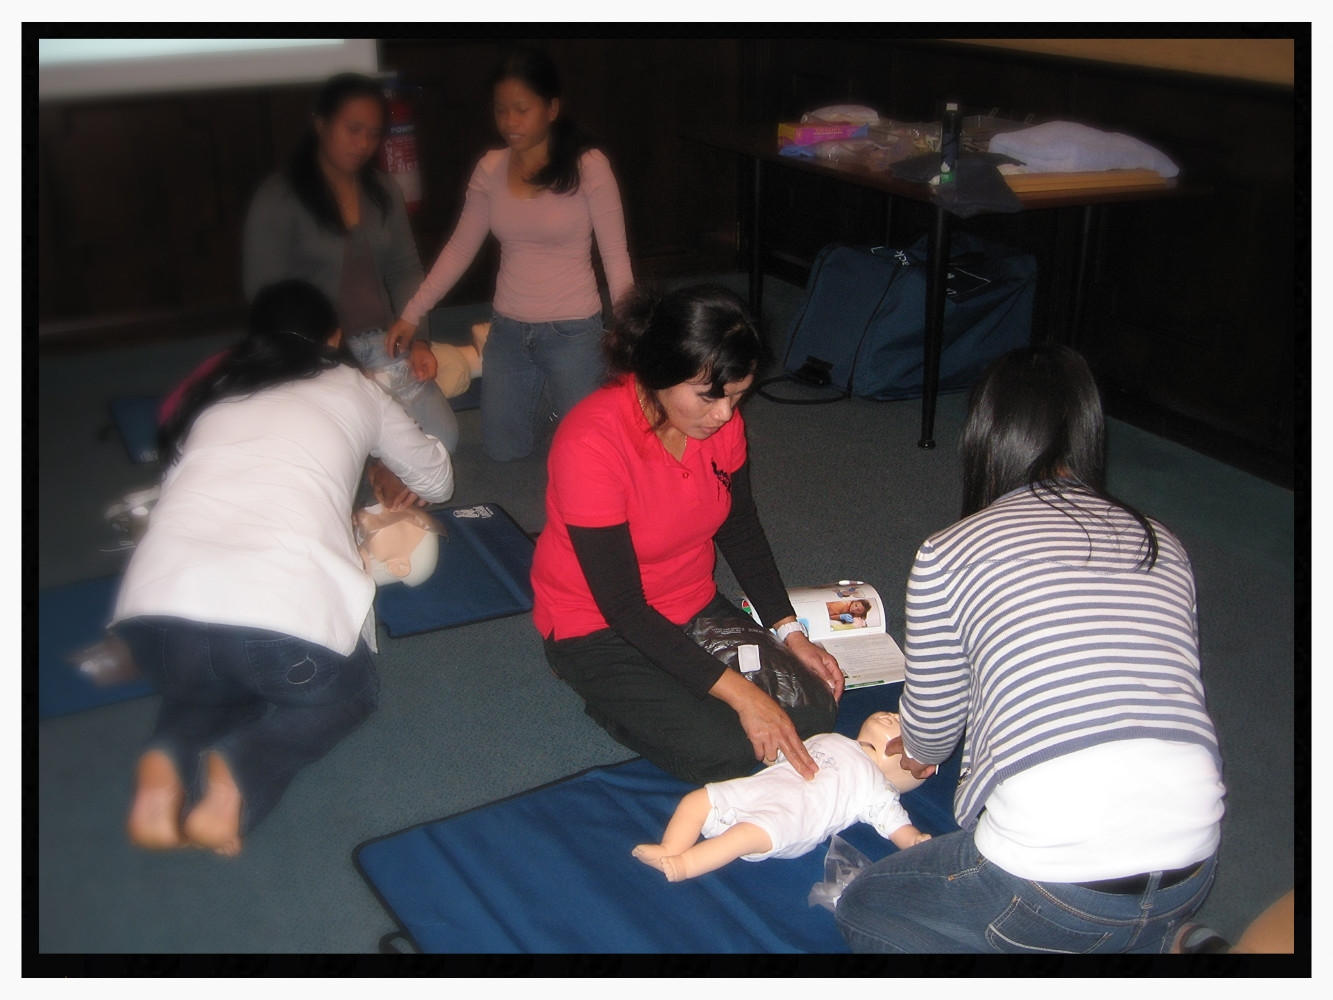 First Aid Training - Infant CPR